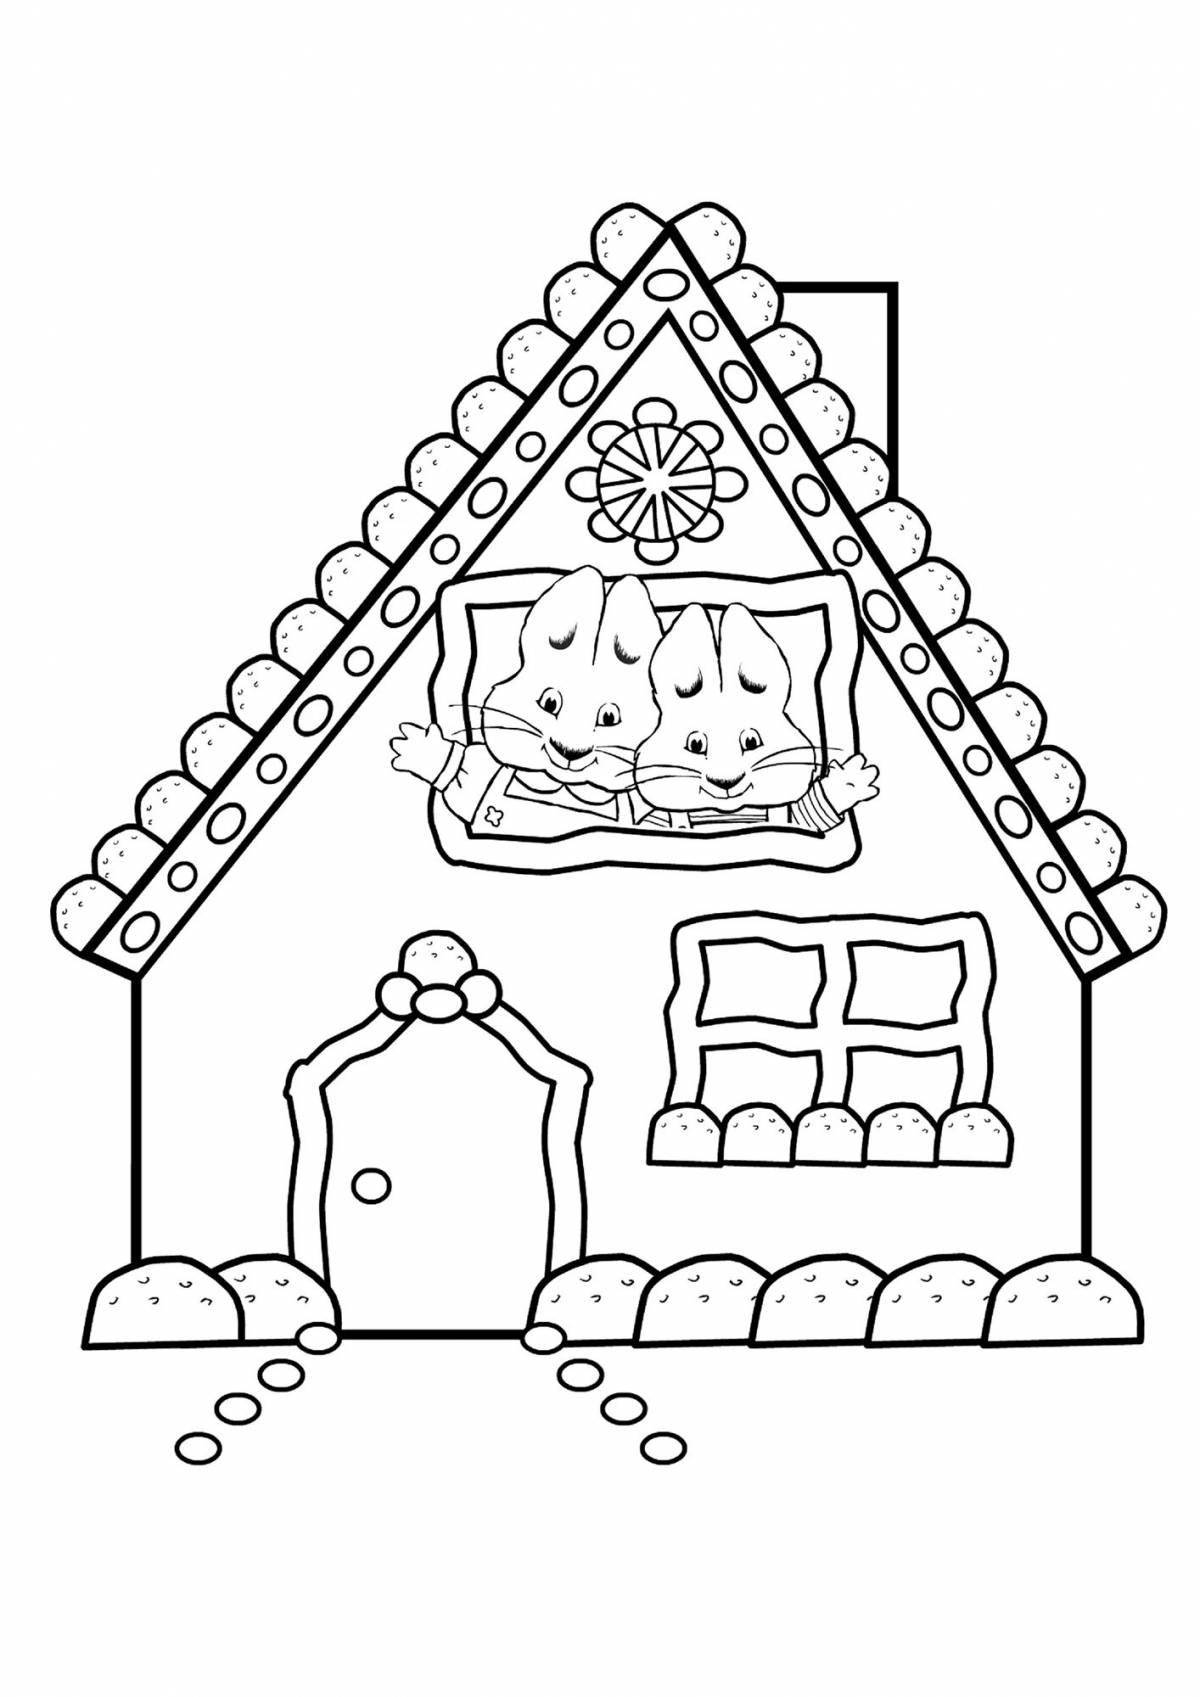 Outstanding pre-k cat house coloring page